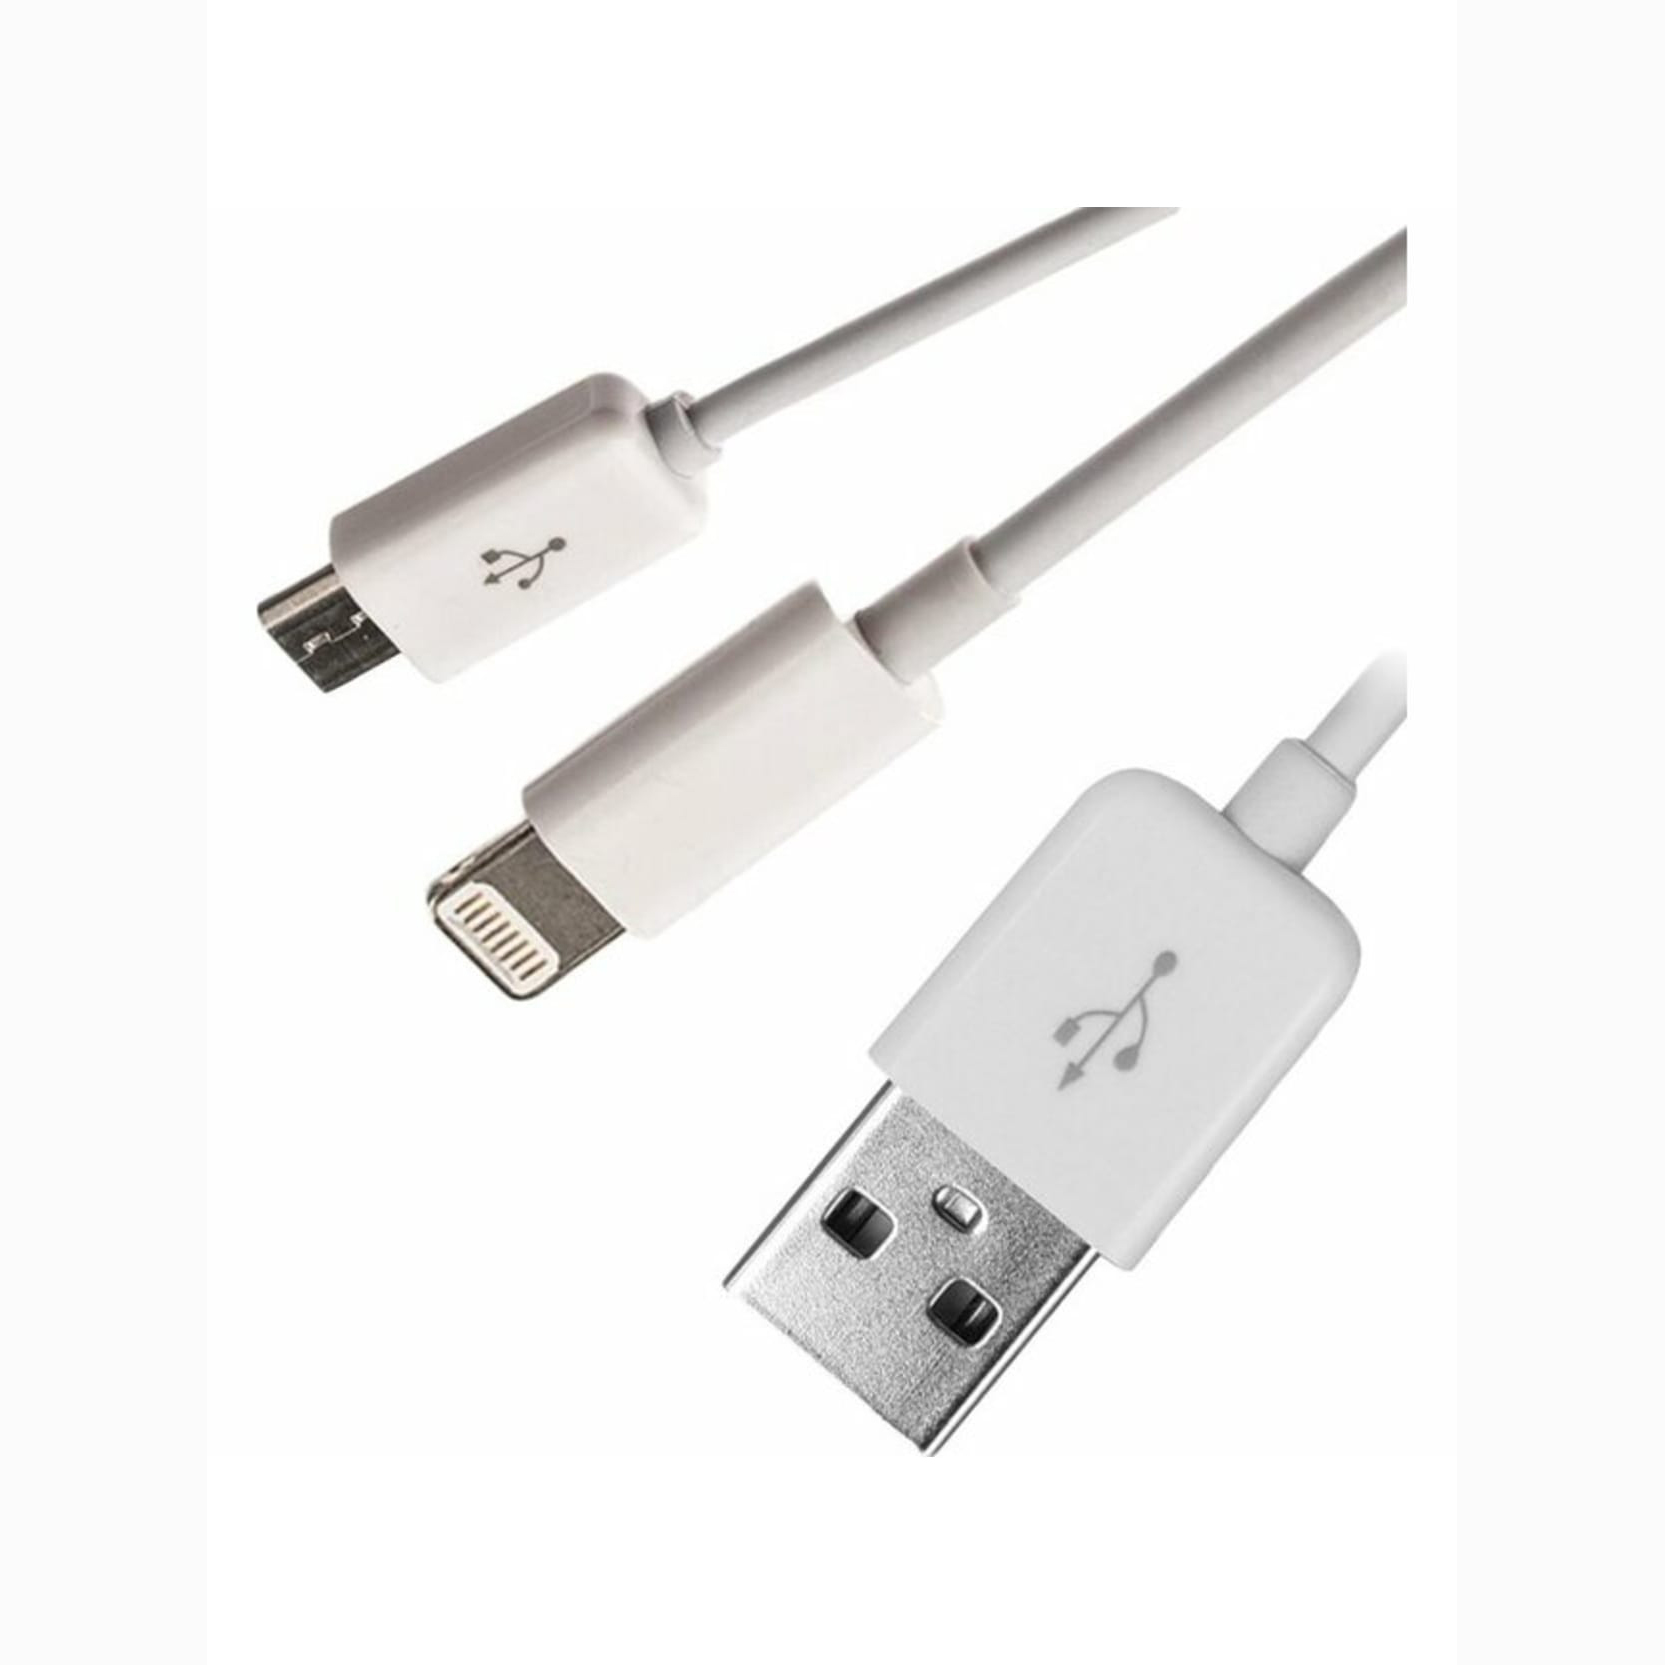 CABLE IPHONE& MICRO TO USB CHARGE FOR SMARTPHONE ,Other Smartphone Acc